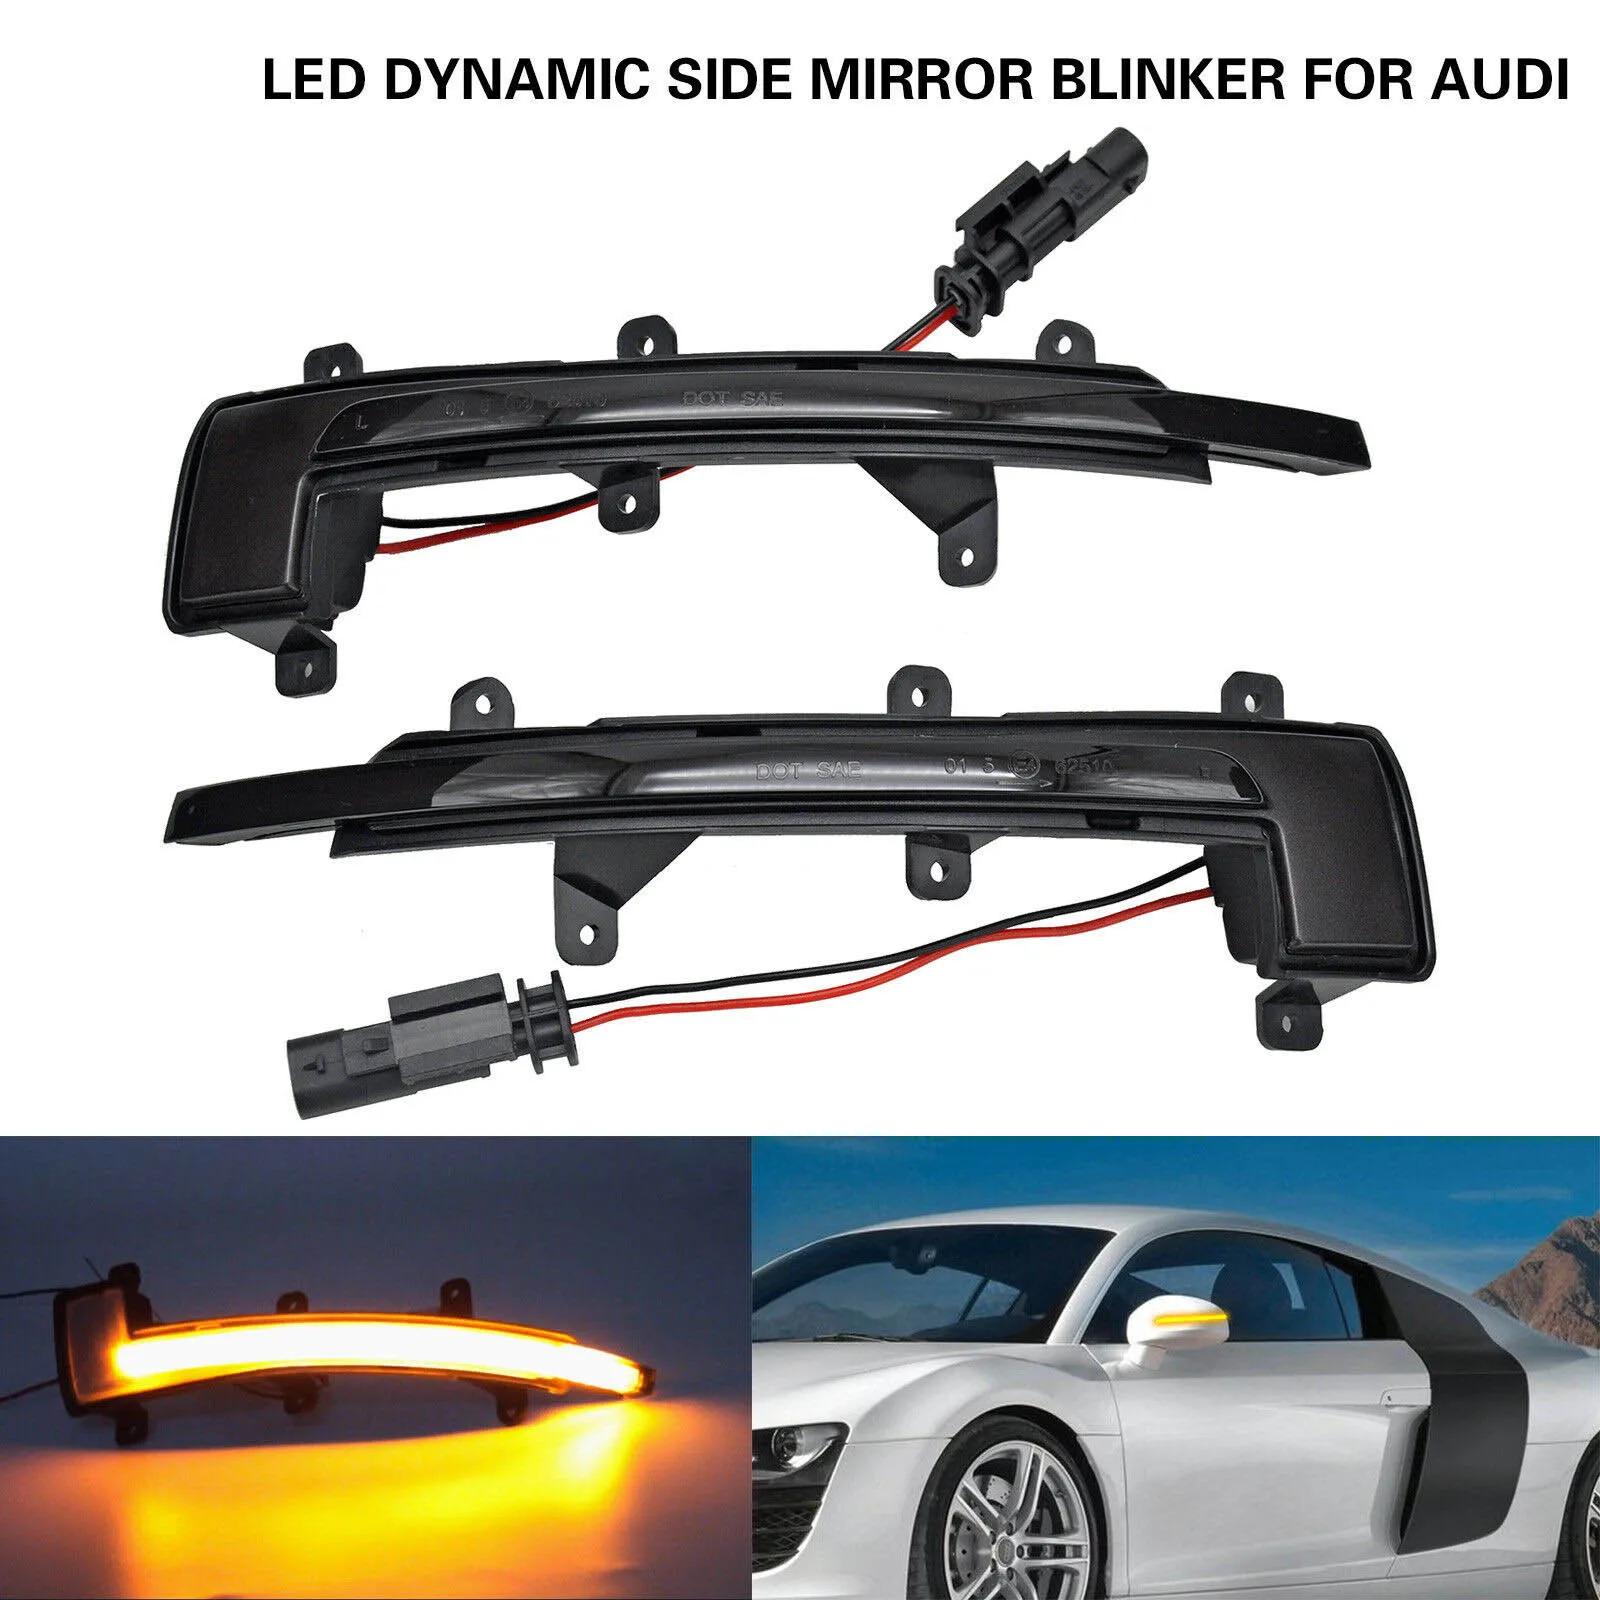 2PCS Amber LED Dynamic Side Mirror Light Turn Signal Light For Audi TT TTS TTRS Coupe Cabrio 2006-,R8 2007-,Smoked lens